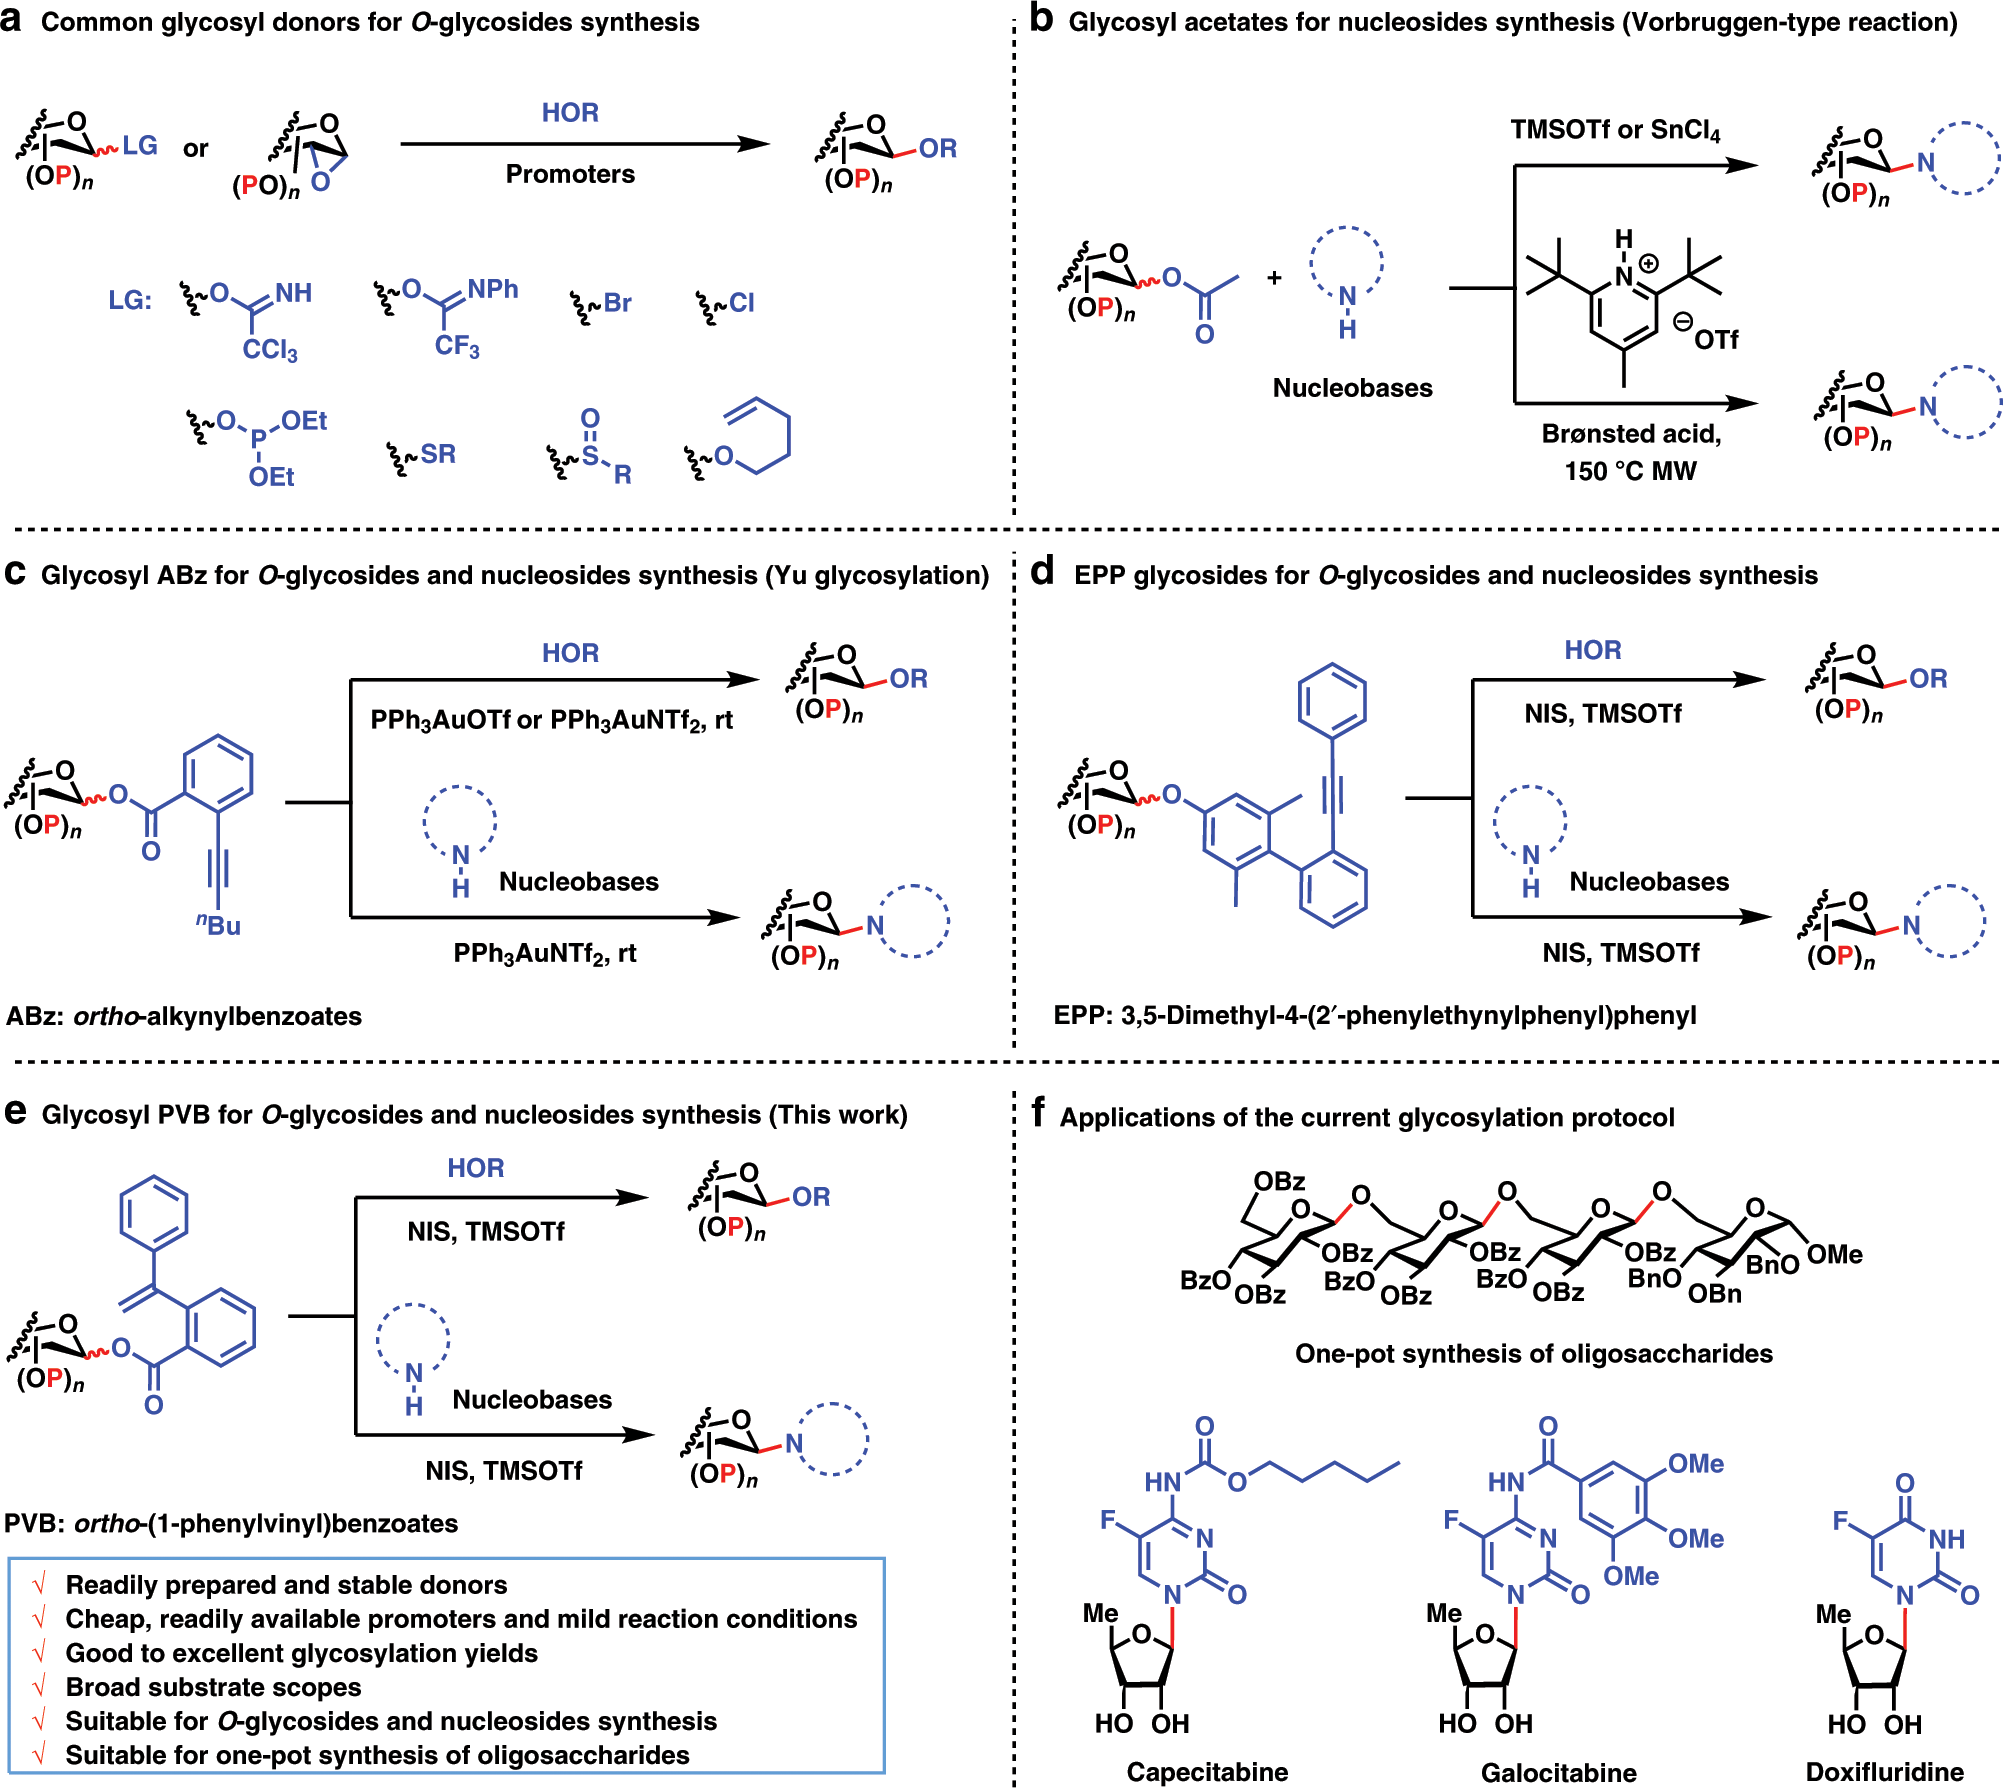 Glycosyl ortho-(1-phenylvinyl)benzoates versatile glycosyl donors for highly efficient synthesis of both O-glycosides and nucleosides Nature Communications